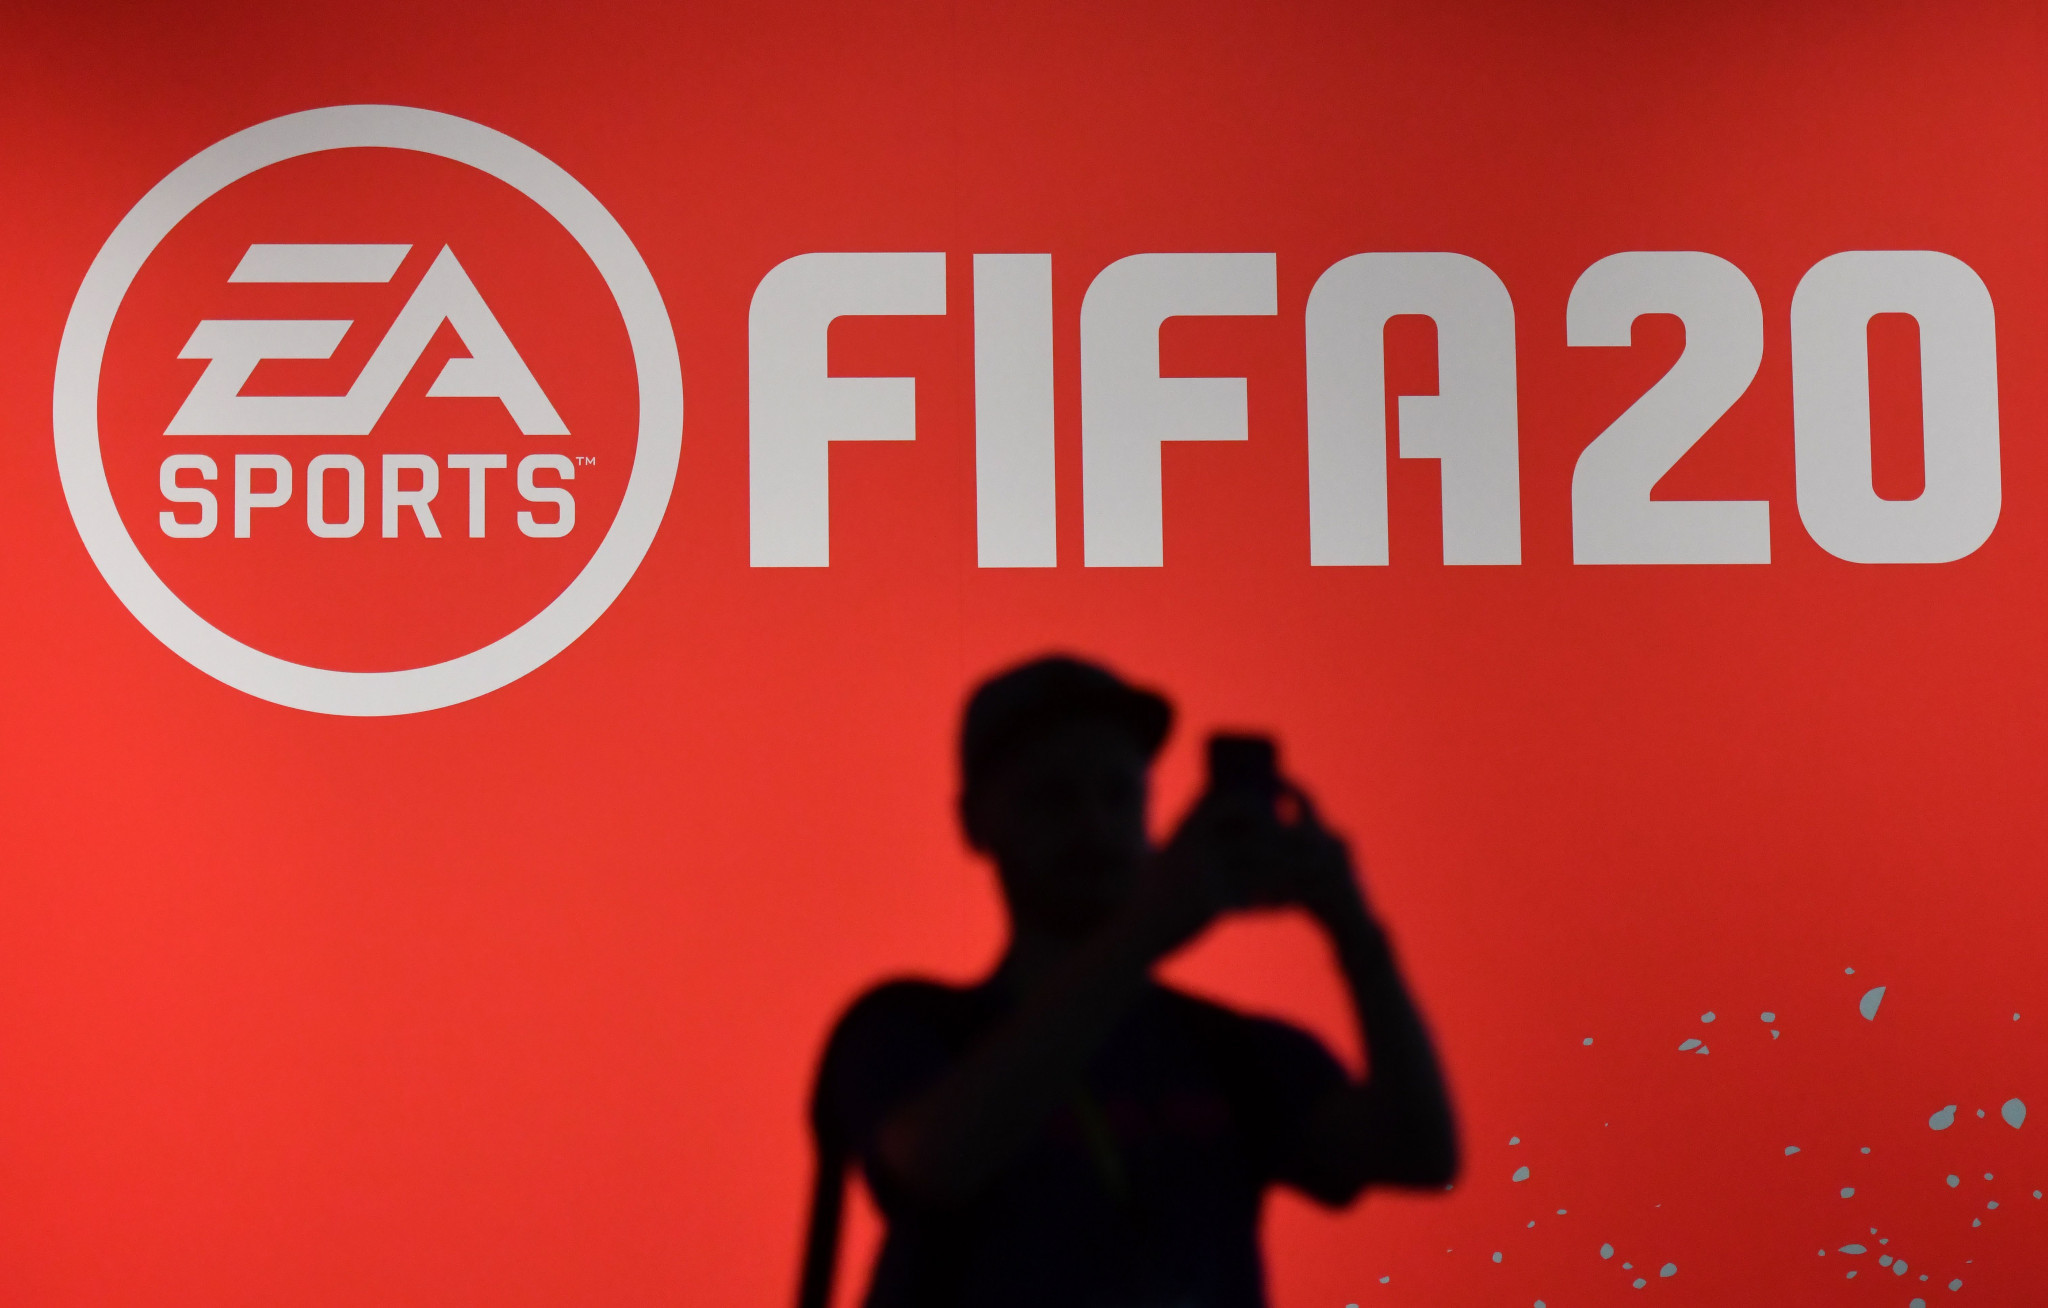 FIFA20 reproduced racial stereotypes in footballers' ratings, claims study